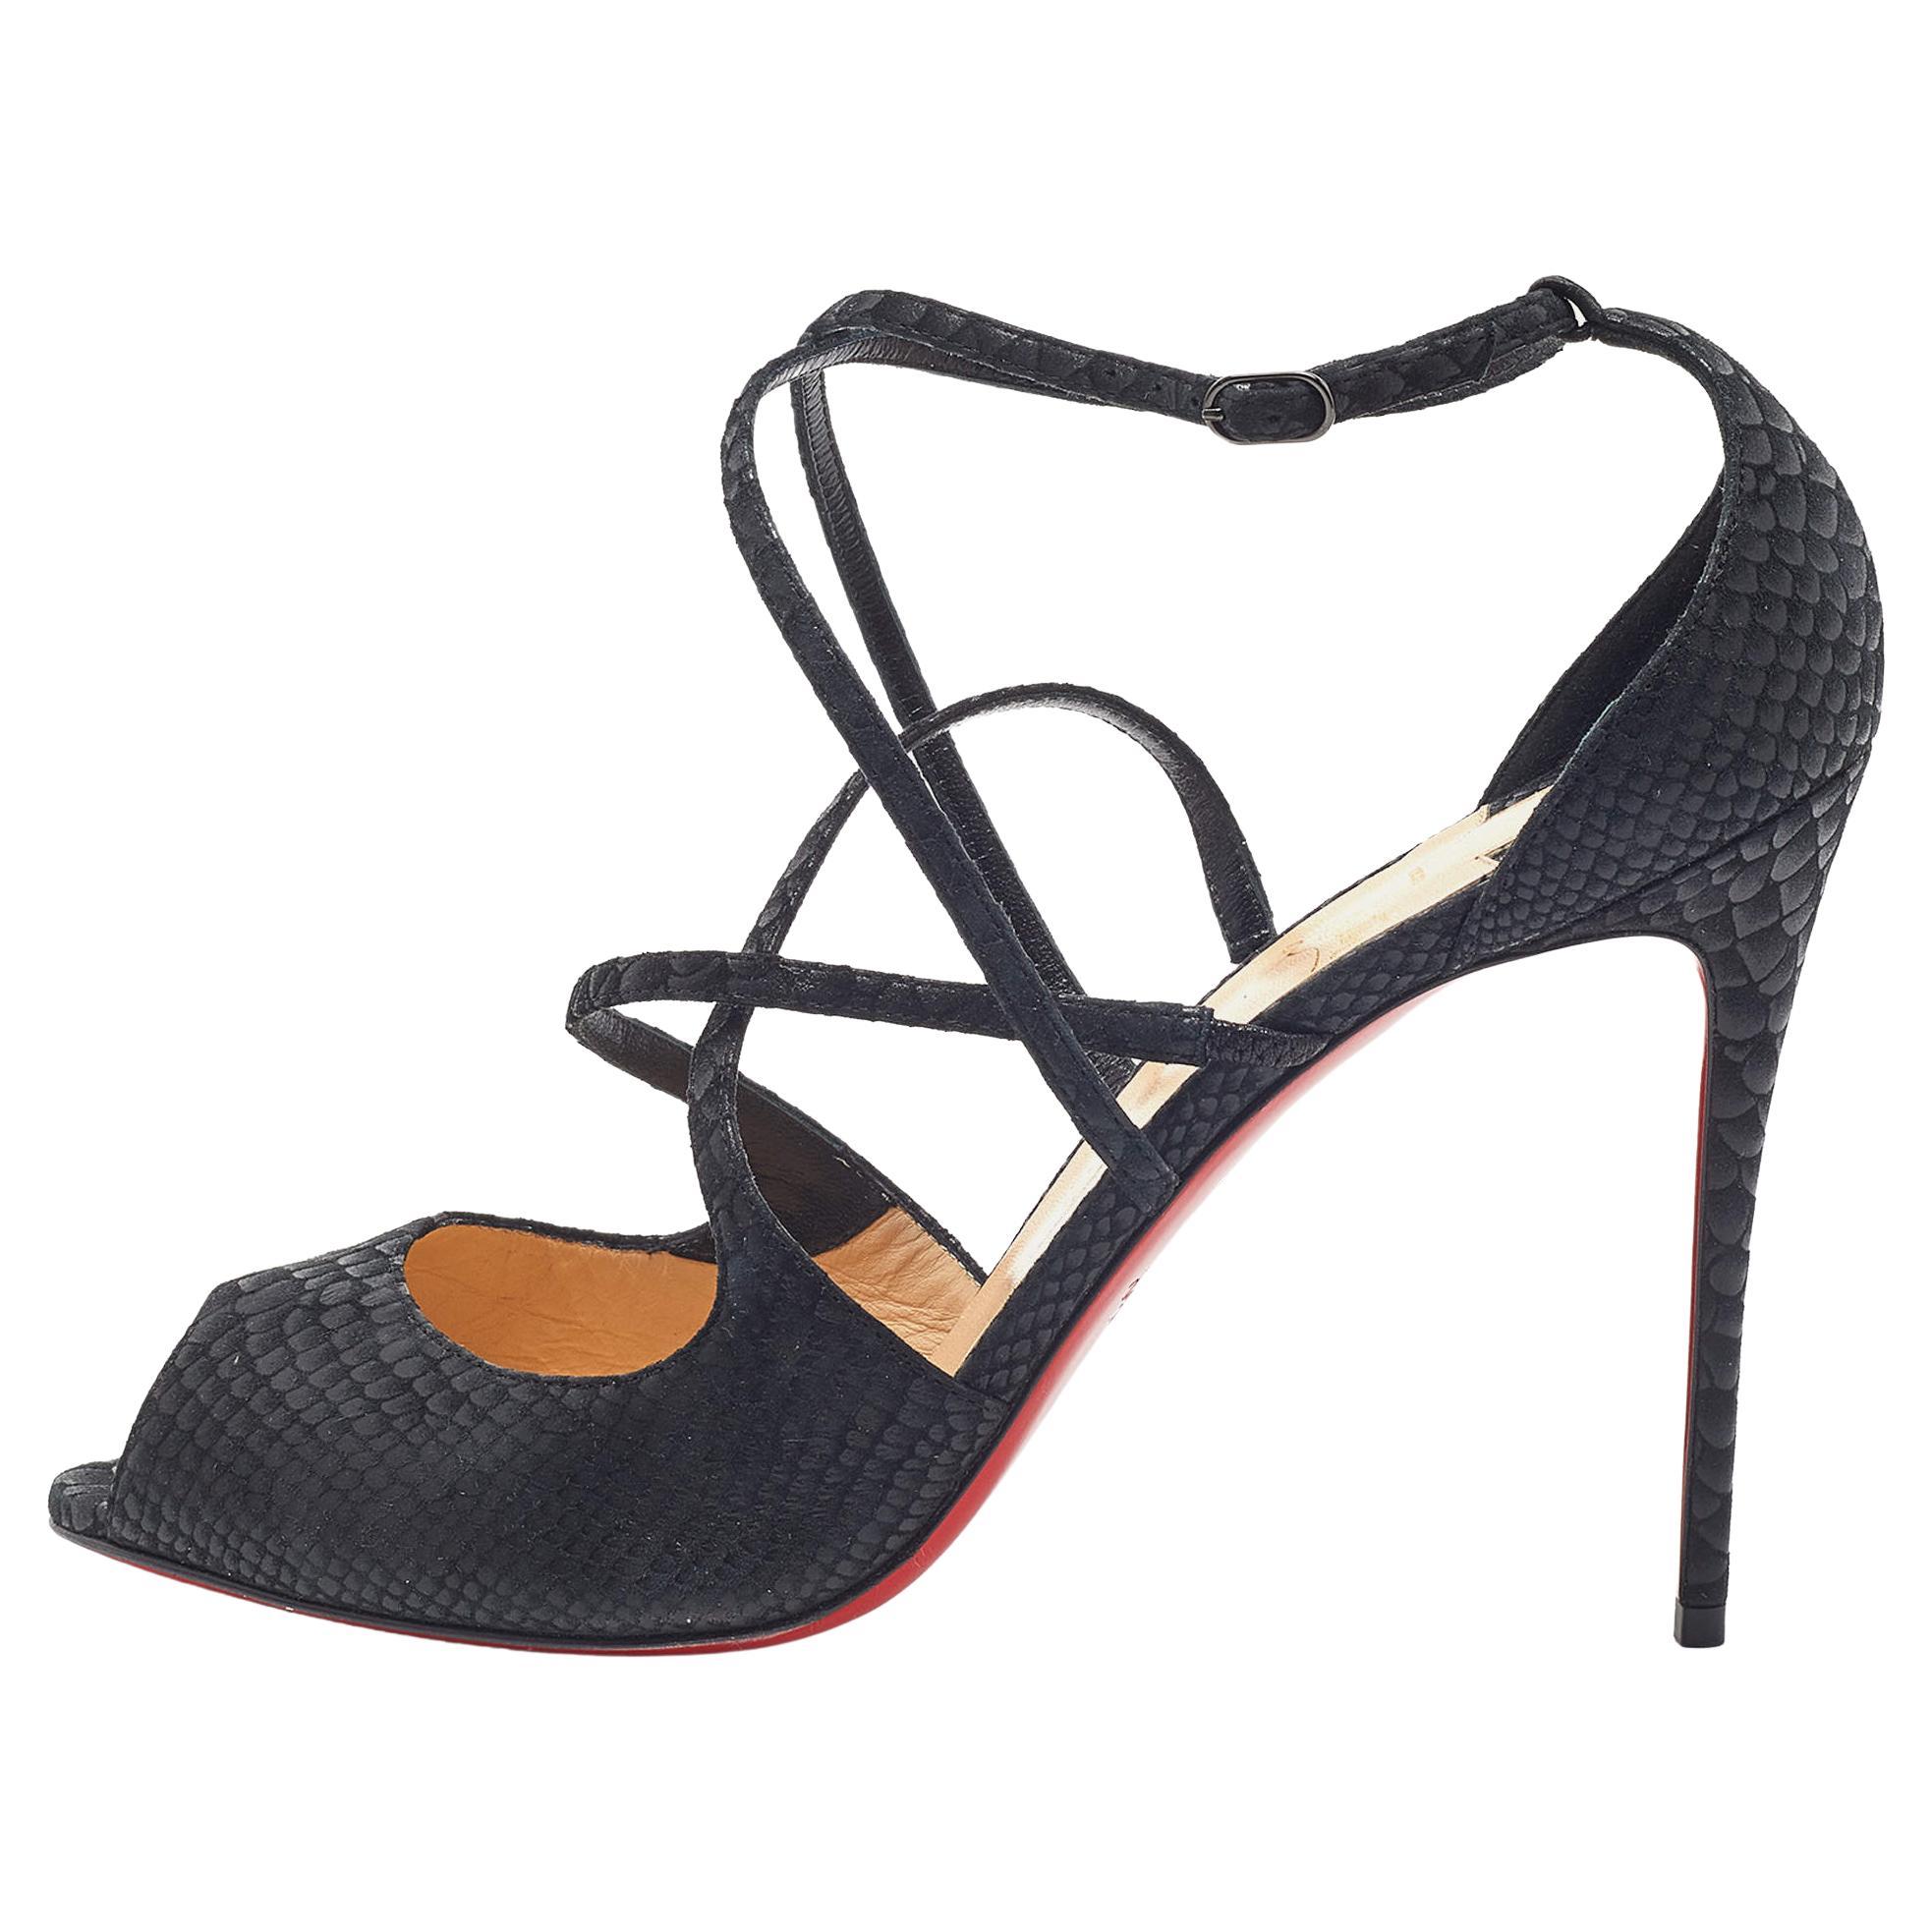 Christian Louboutin Black Embossed Snakeskin Leather Strappy Sandals Size 42